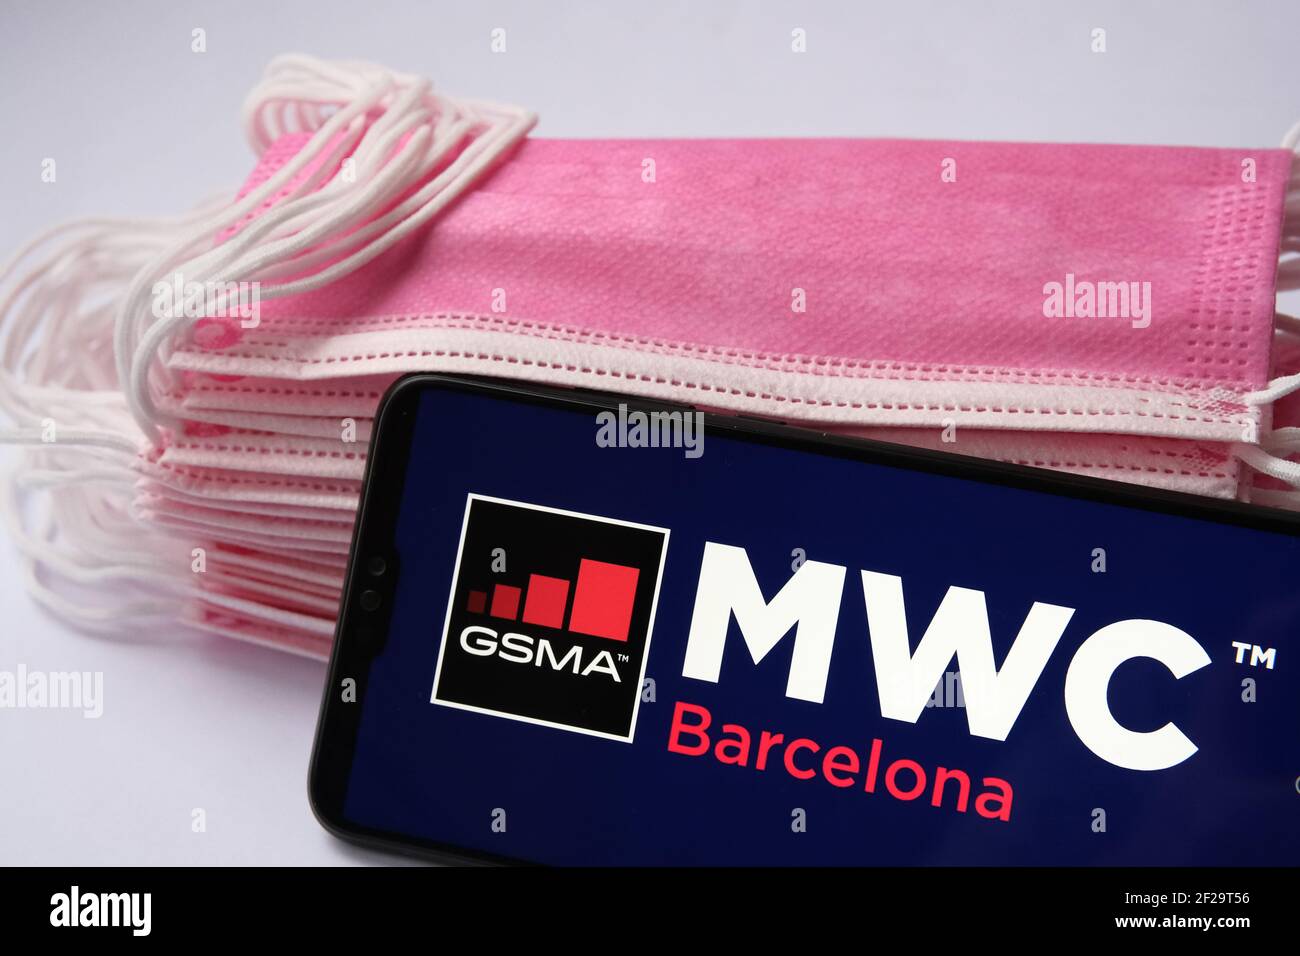 Mobile World Congress Barcelona logo seen on the screen of smartphone and pile of face masks on the background. Concept for event during COVID pandemi Stock Photo